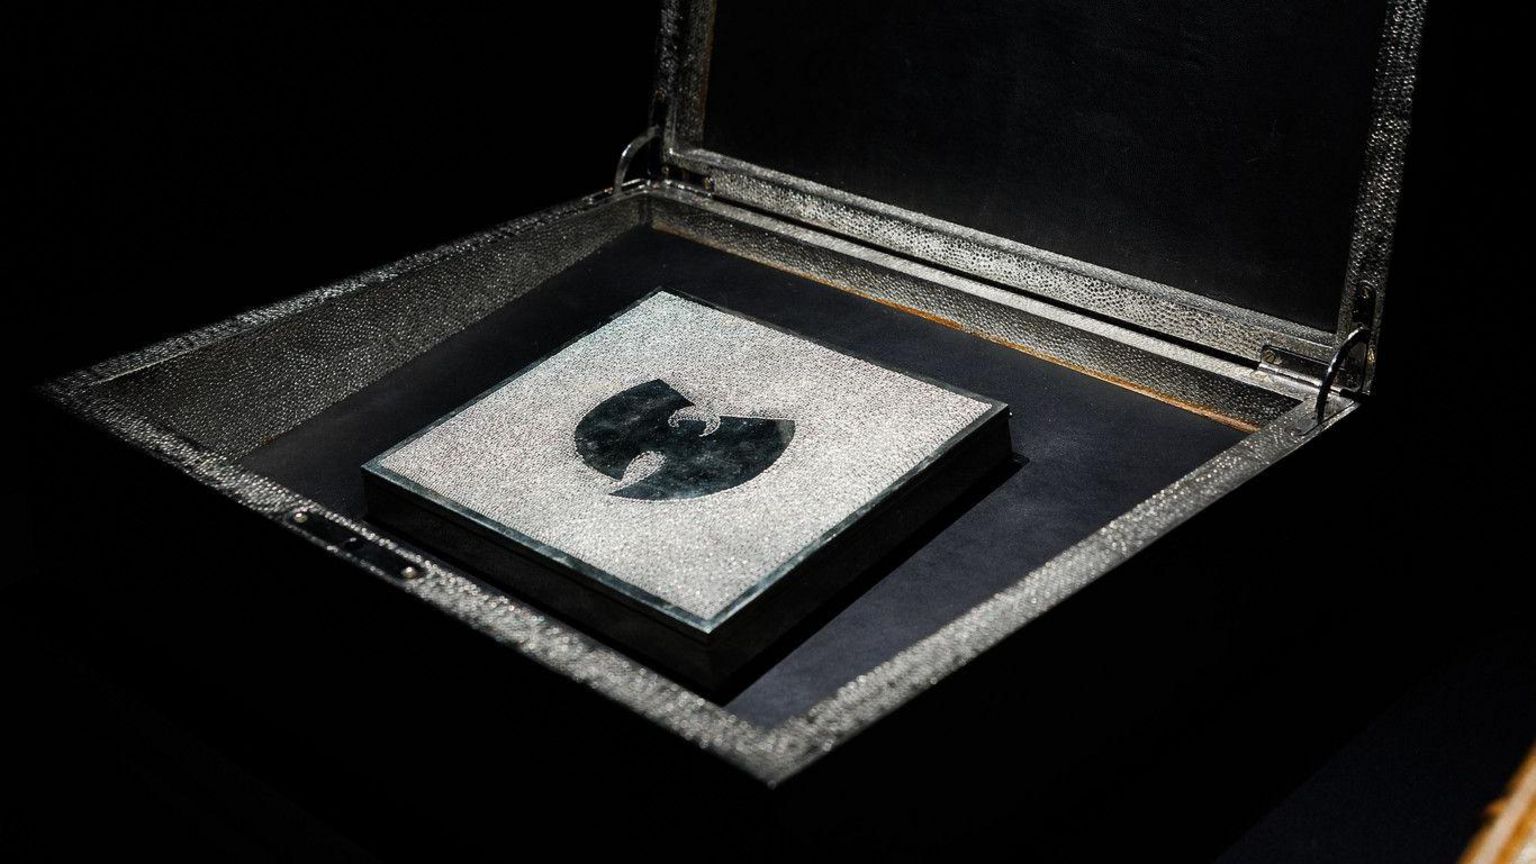 The album housed in a silver box on display in the museum